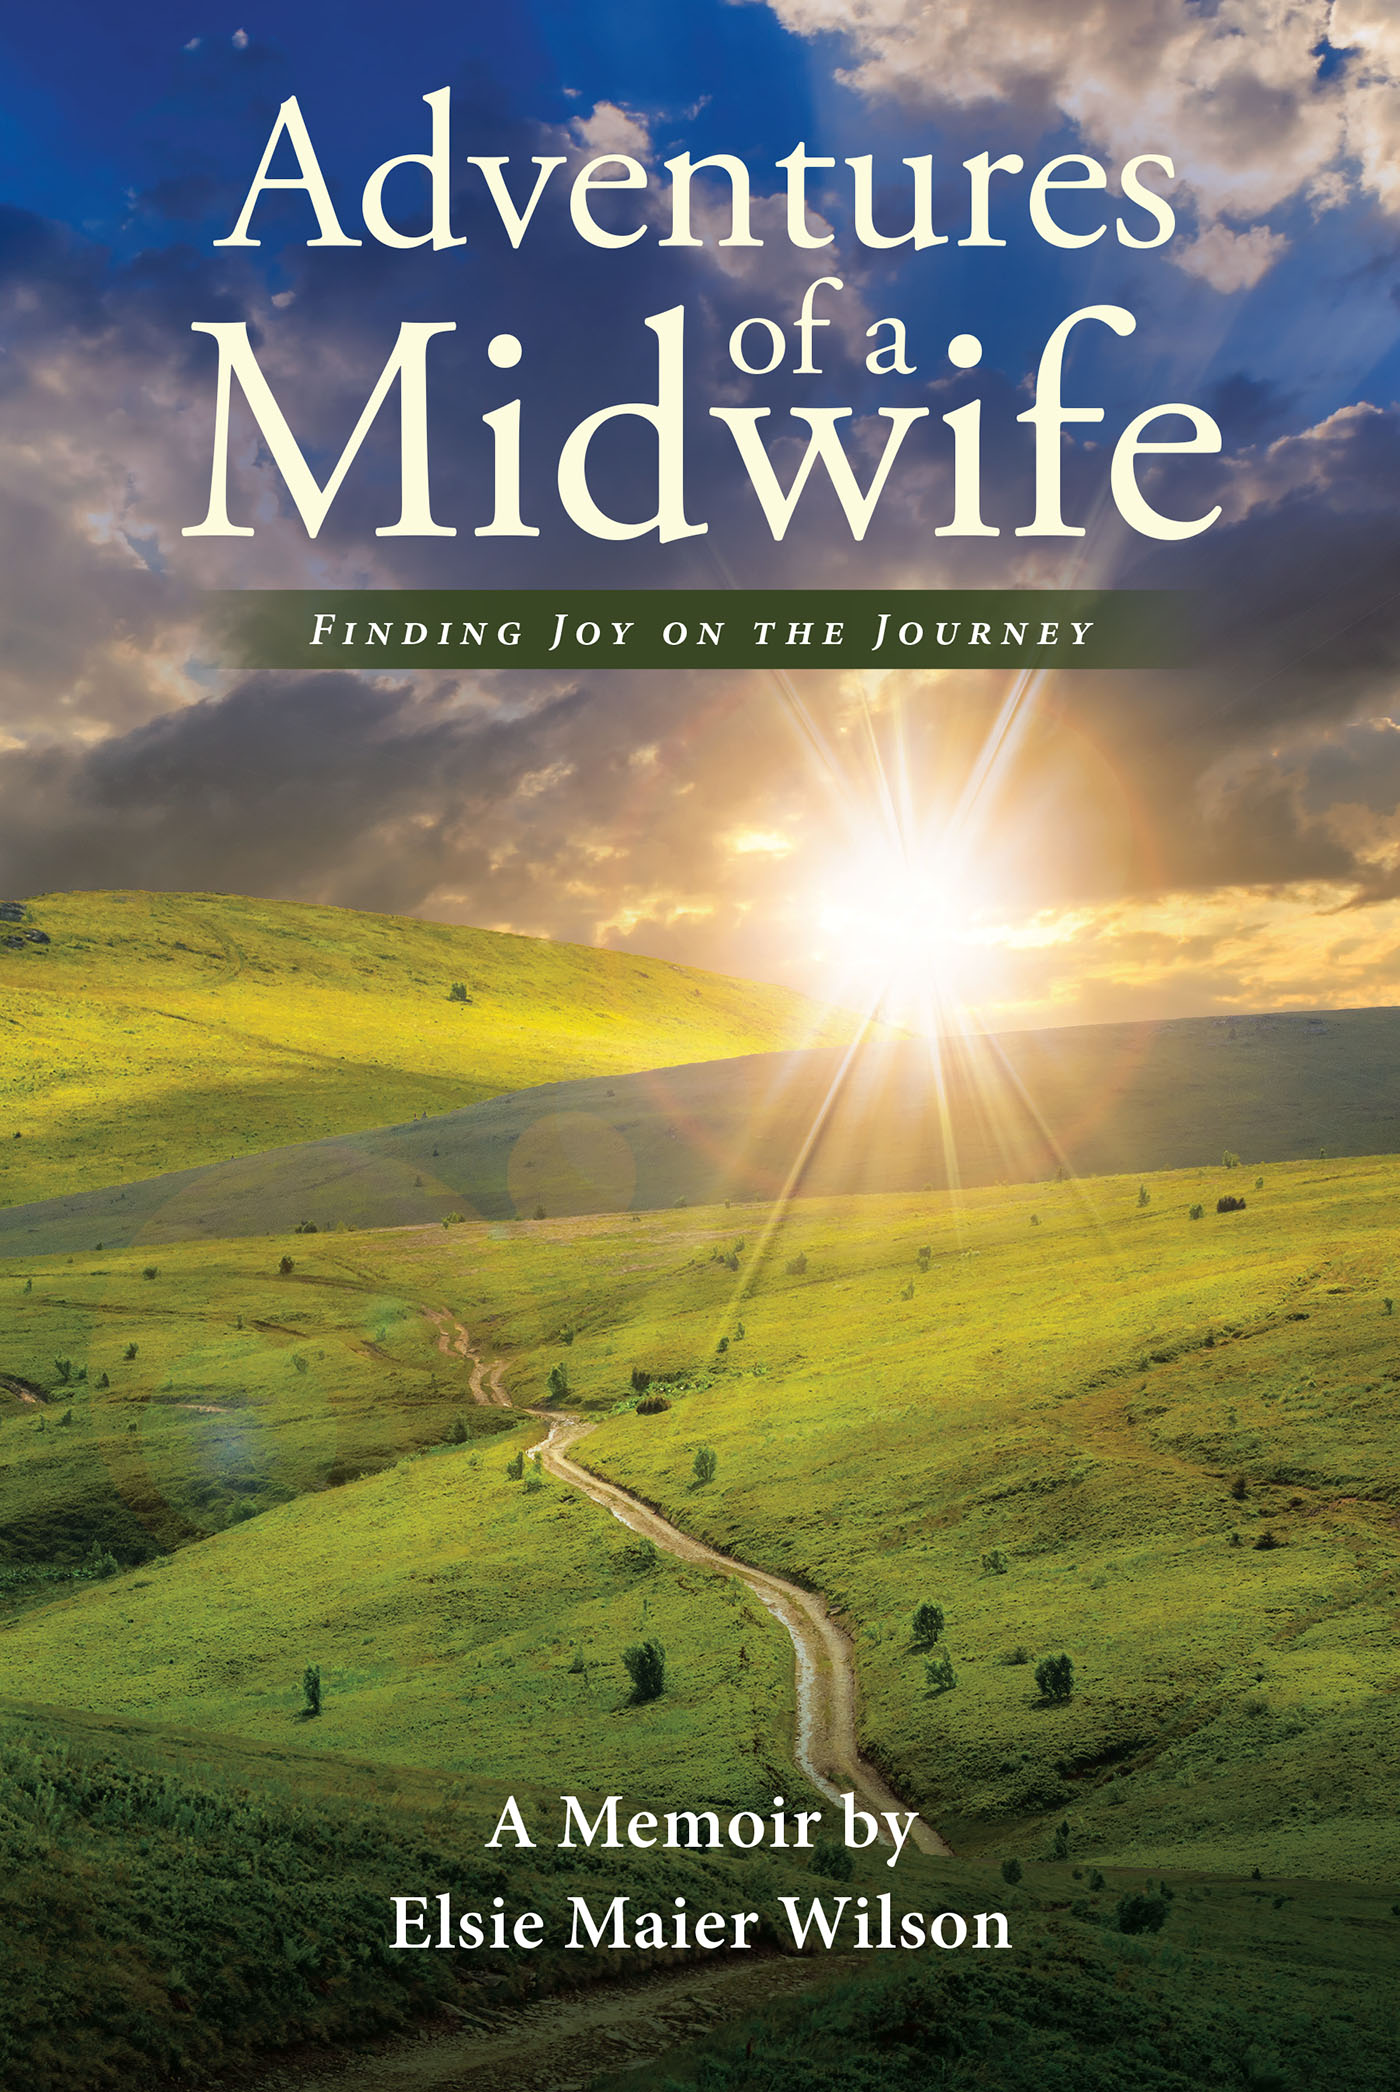 Author Elsie Maier Wilson’s New Book, "Adventures of a Midwife: Finding Joy on the Journey," Follows the Author as She Recounts Her Experiences in Working as a Midwife